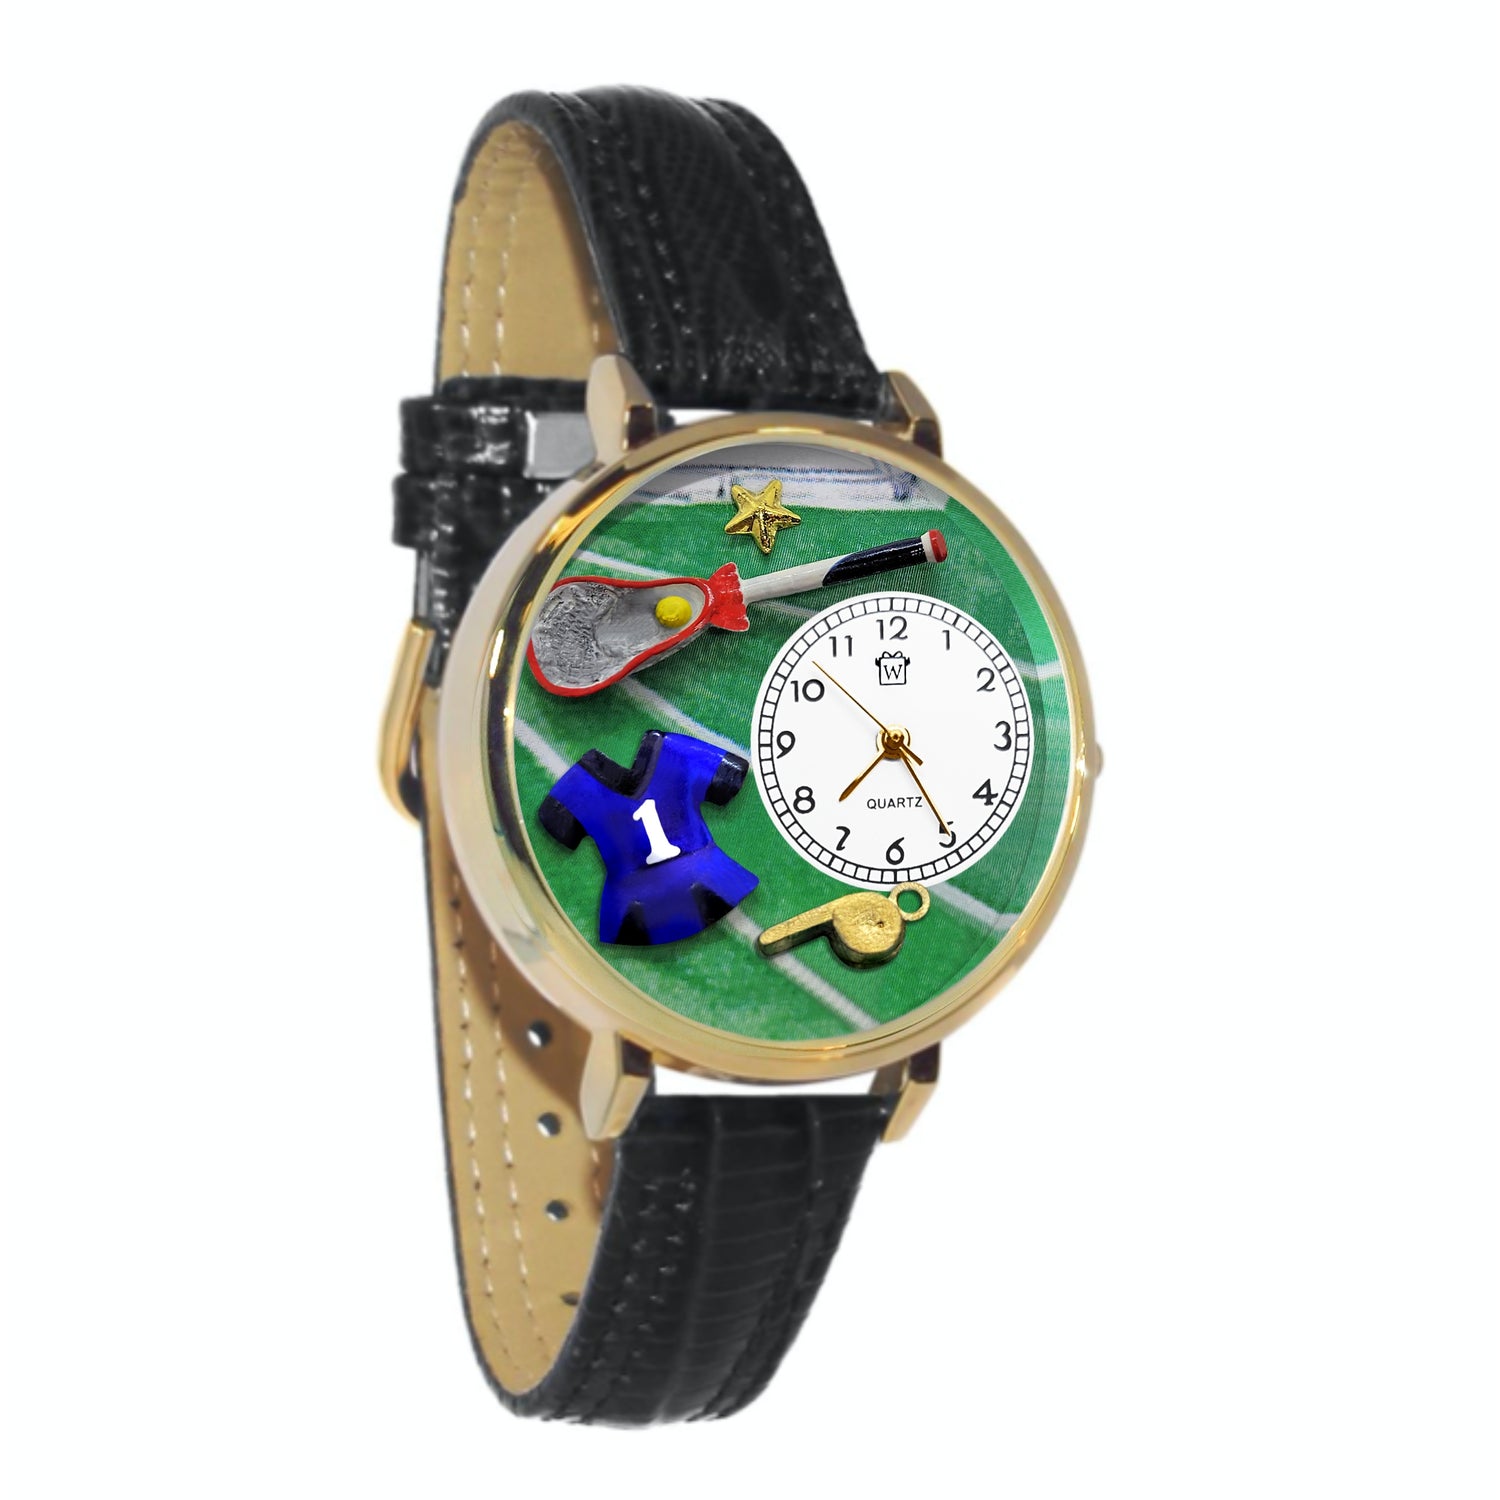 Whimsical Gifts | Lacrosse 3D Watch Large Style | Handmade in USA | Hobbies & Special Interests | Sports | Novelty Unique Fun Miniatures Gift | Gold Finish Skirt Black Leather Watch Band